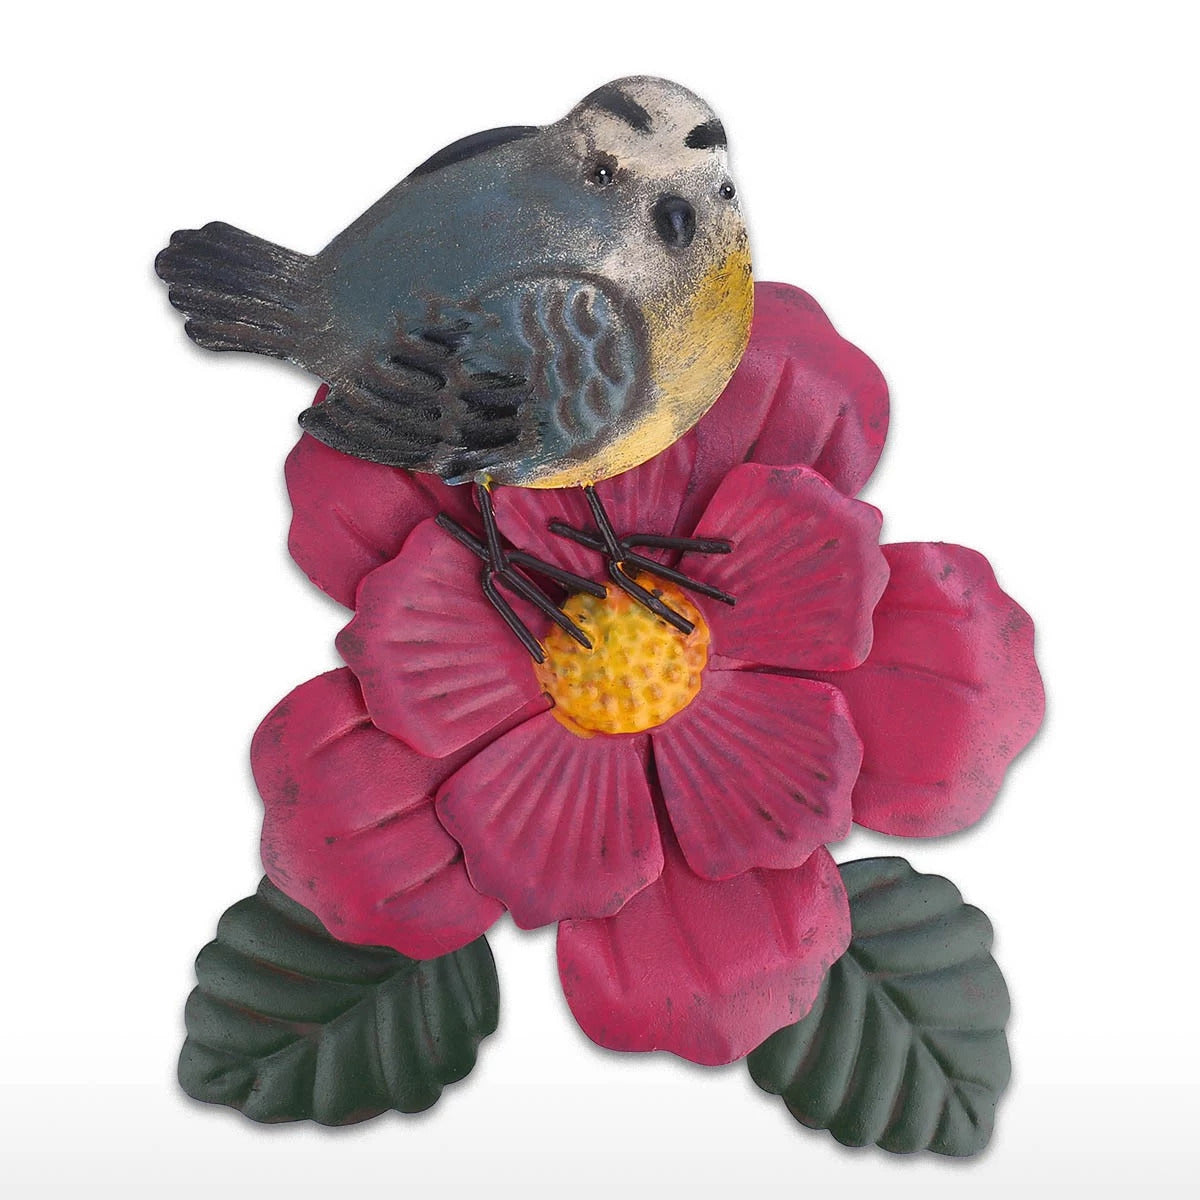 Metal Flower Stakes and Garden Stakes on the Pink Flower with Goldfinch Bird for Garden Ornaments